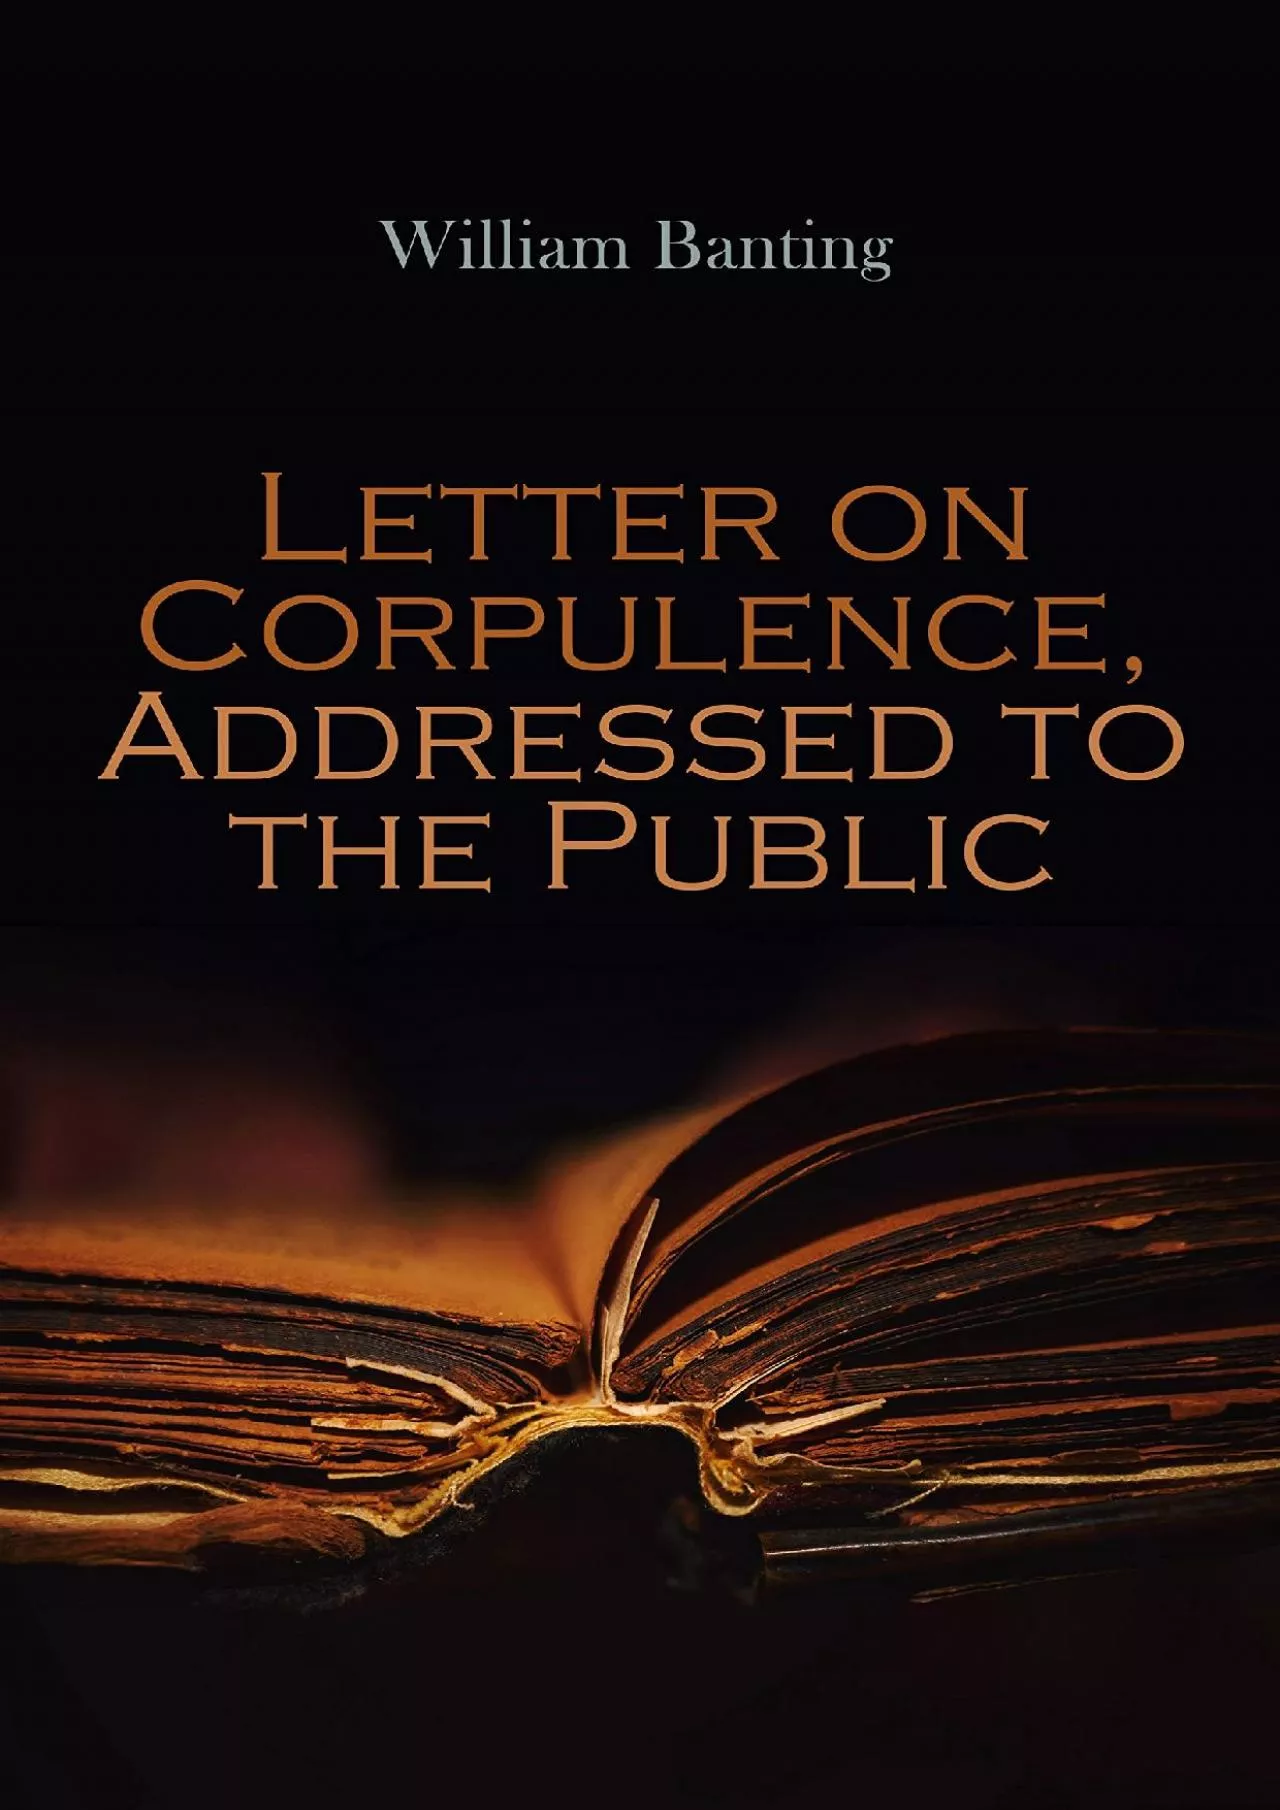 (DOWNLOAD)-Letter on Corpulence, Addressed to the Public